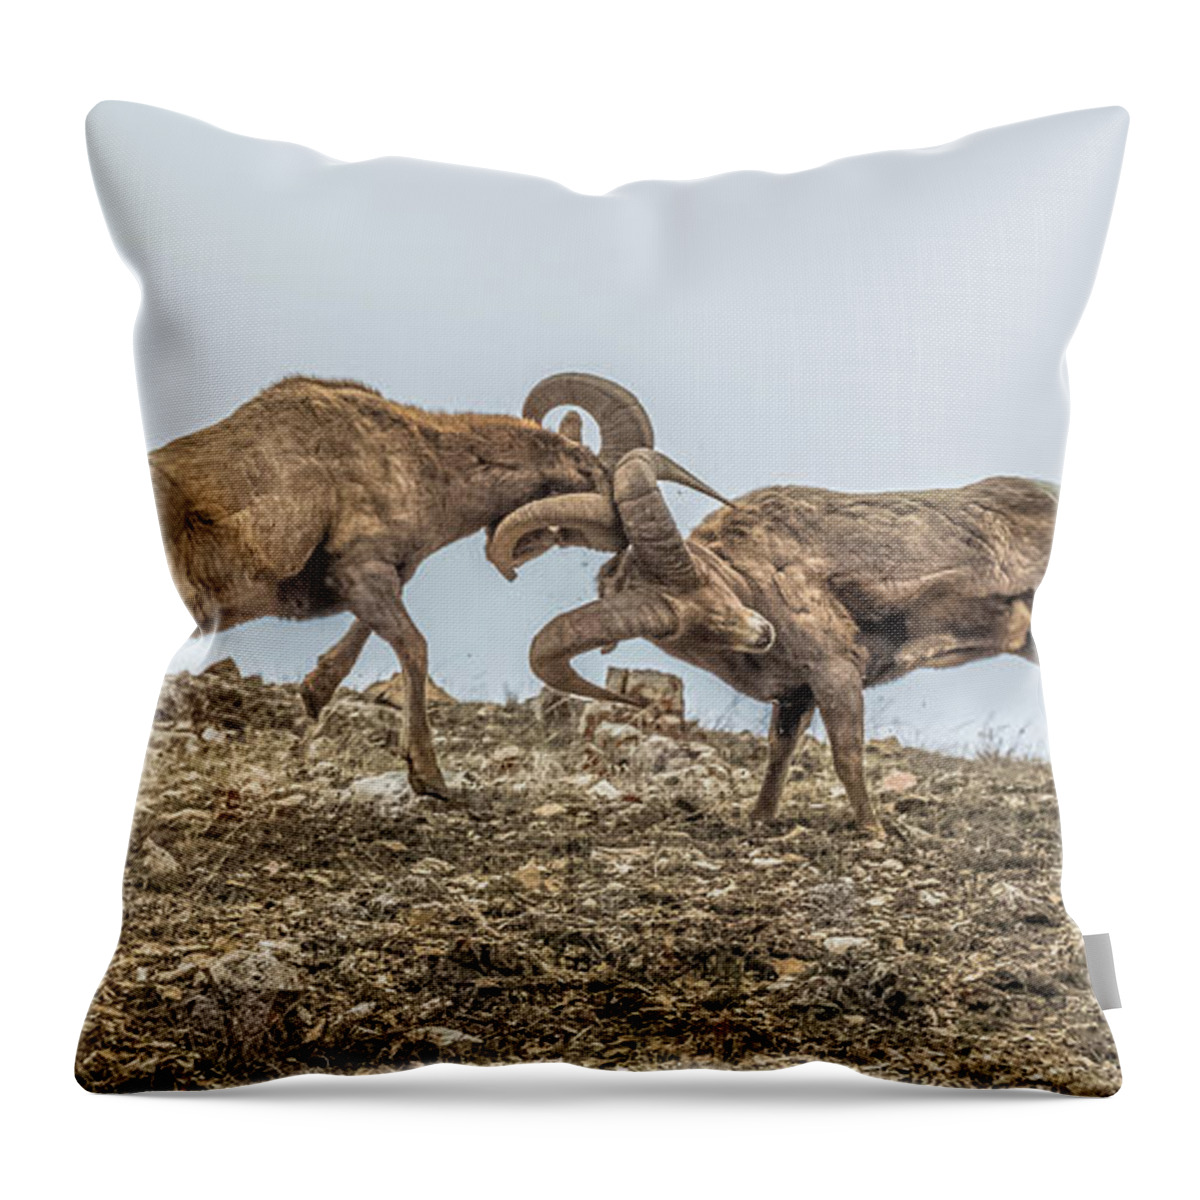 Big-horn Sheep Throw Pillow featuring the photograph Knocked Silly by Yeates Photography